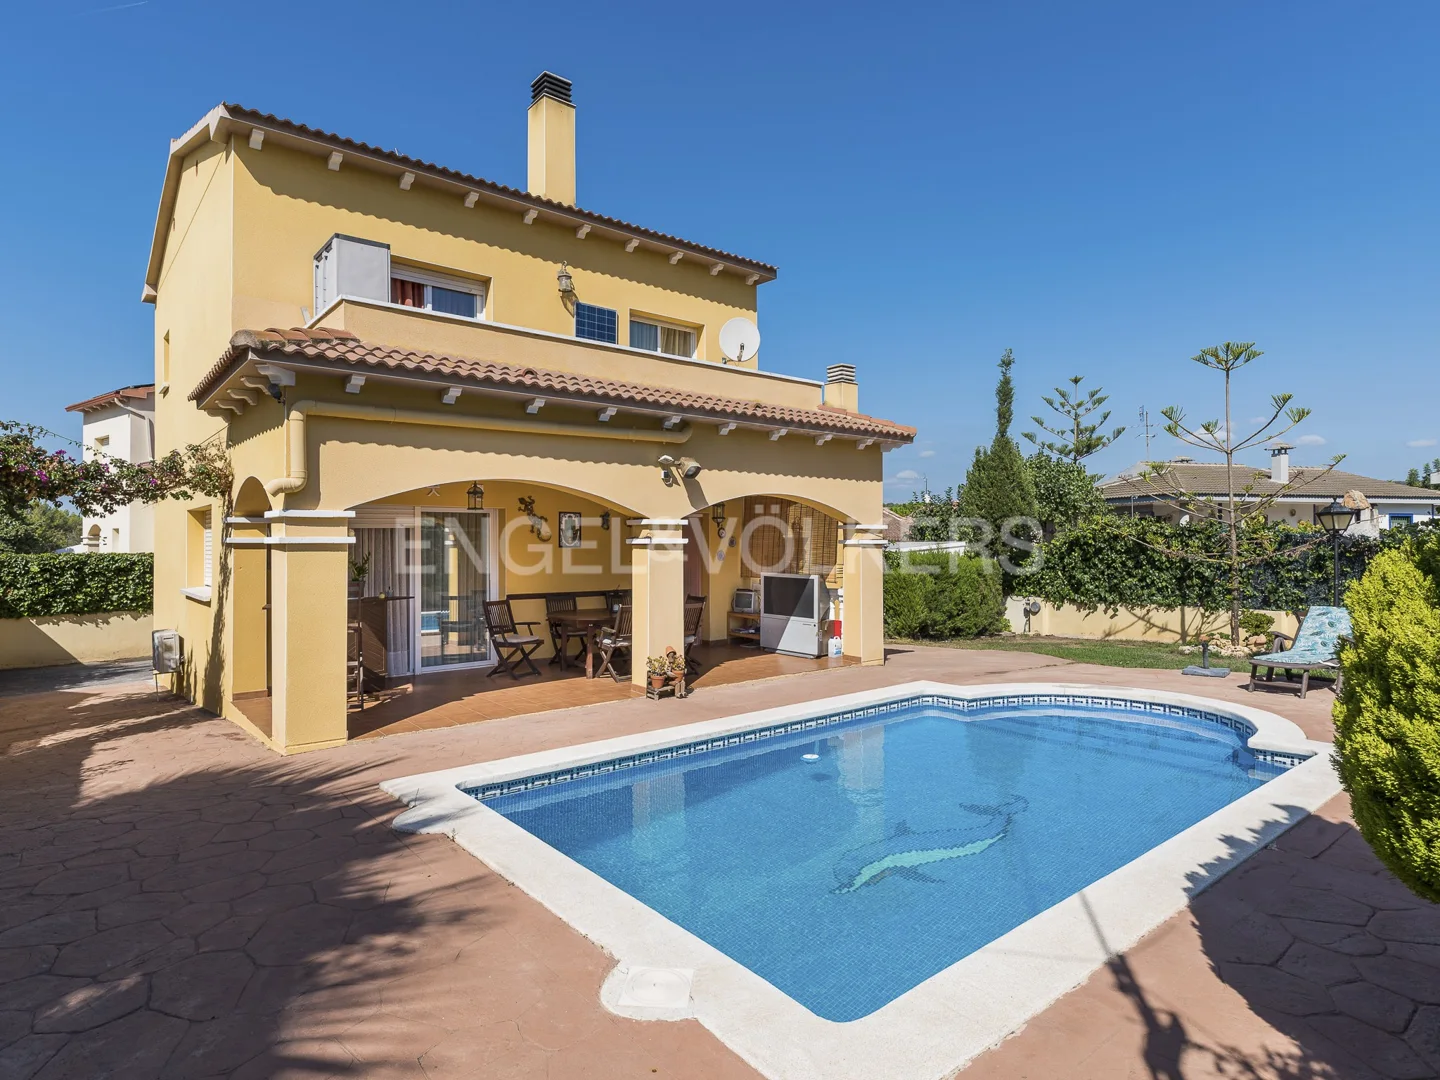 Detached house with pool in Creixell